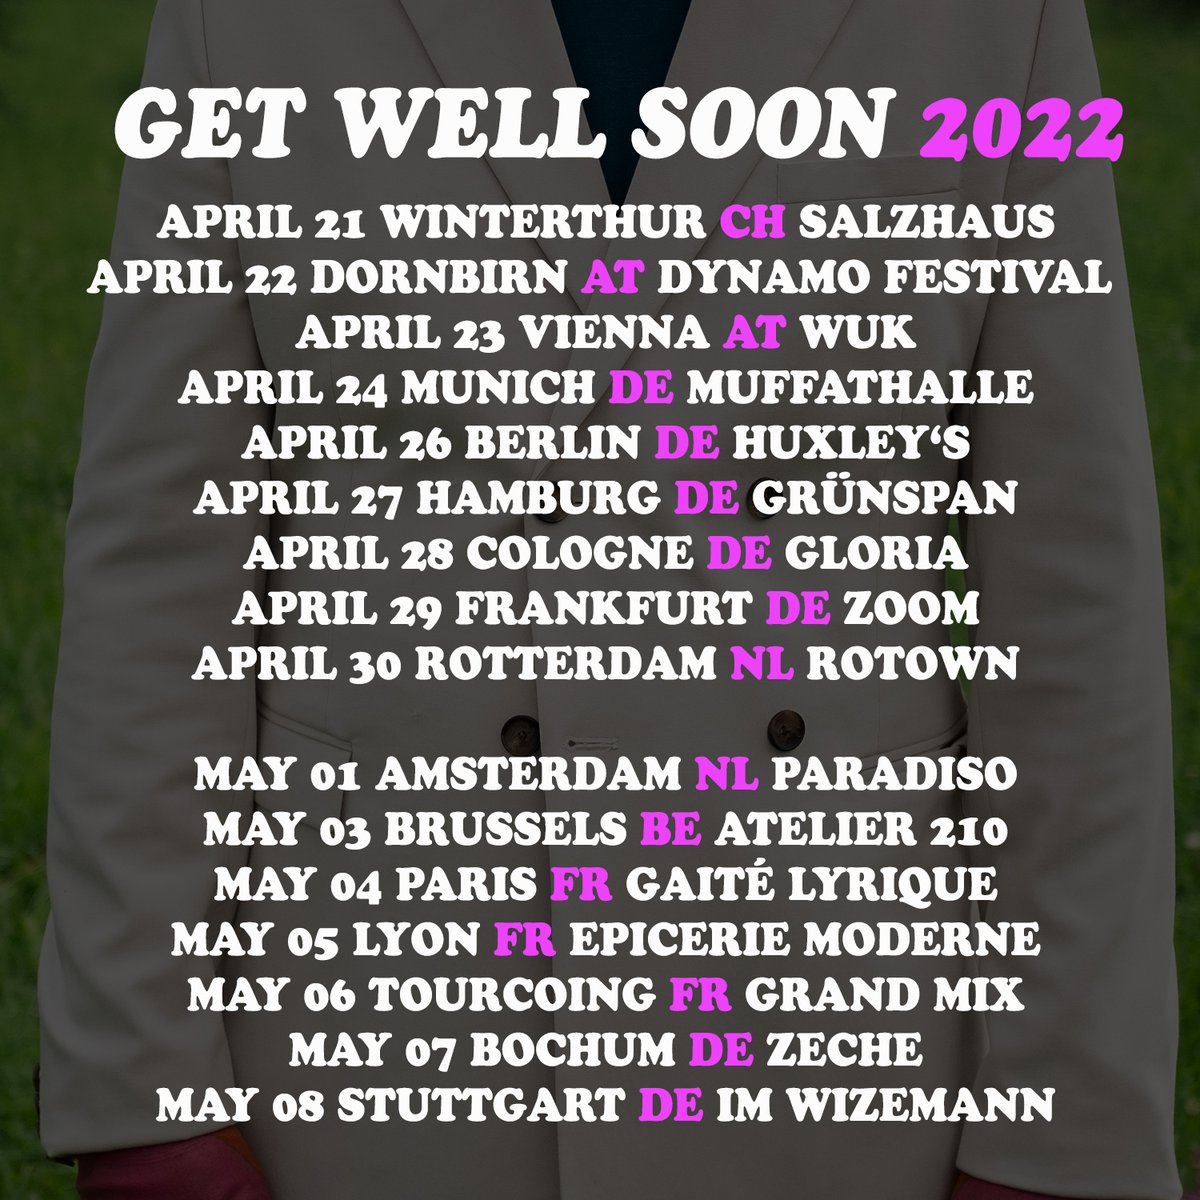 GET WELL SOON TOUR 2022! Tickets -> FRIDAY 12H youwillgetwellsoon.com 🔥💖💐